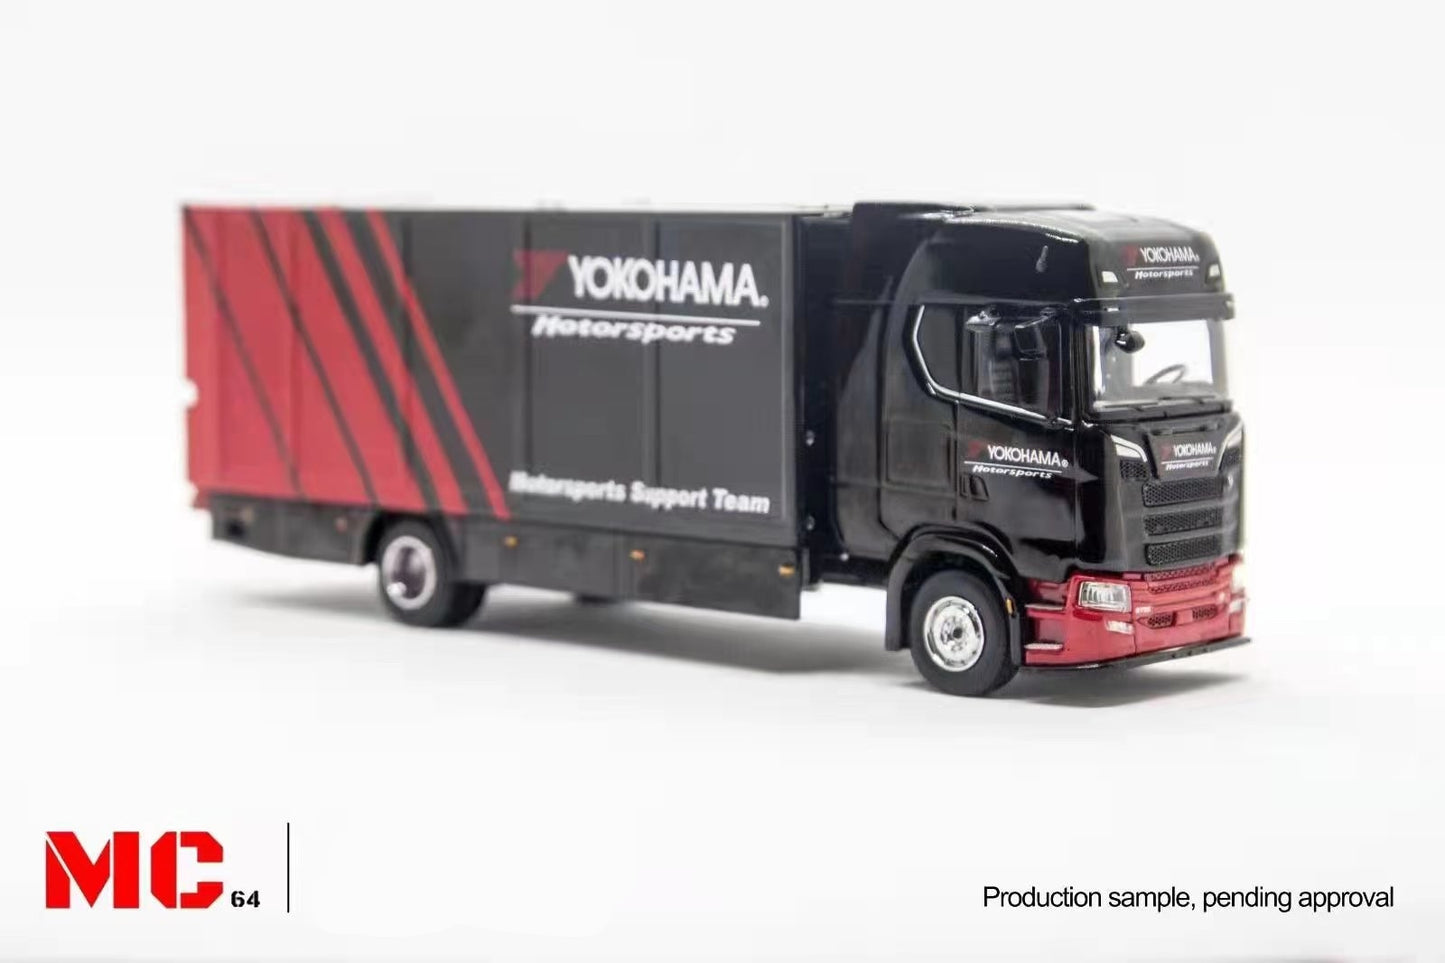 GCD Singapore Exclusive Advan Scania S730 Enclosed Double Deck Gull Wing Tow Truck 1:64 Scale